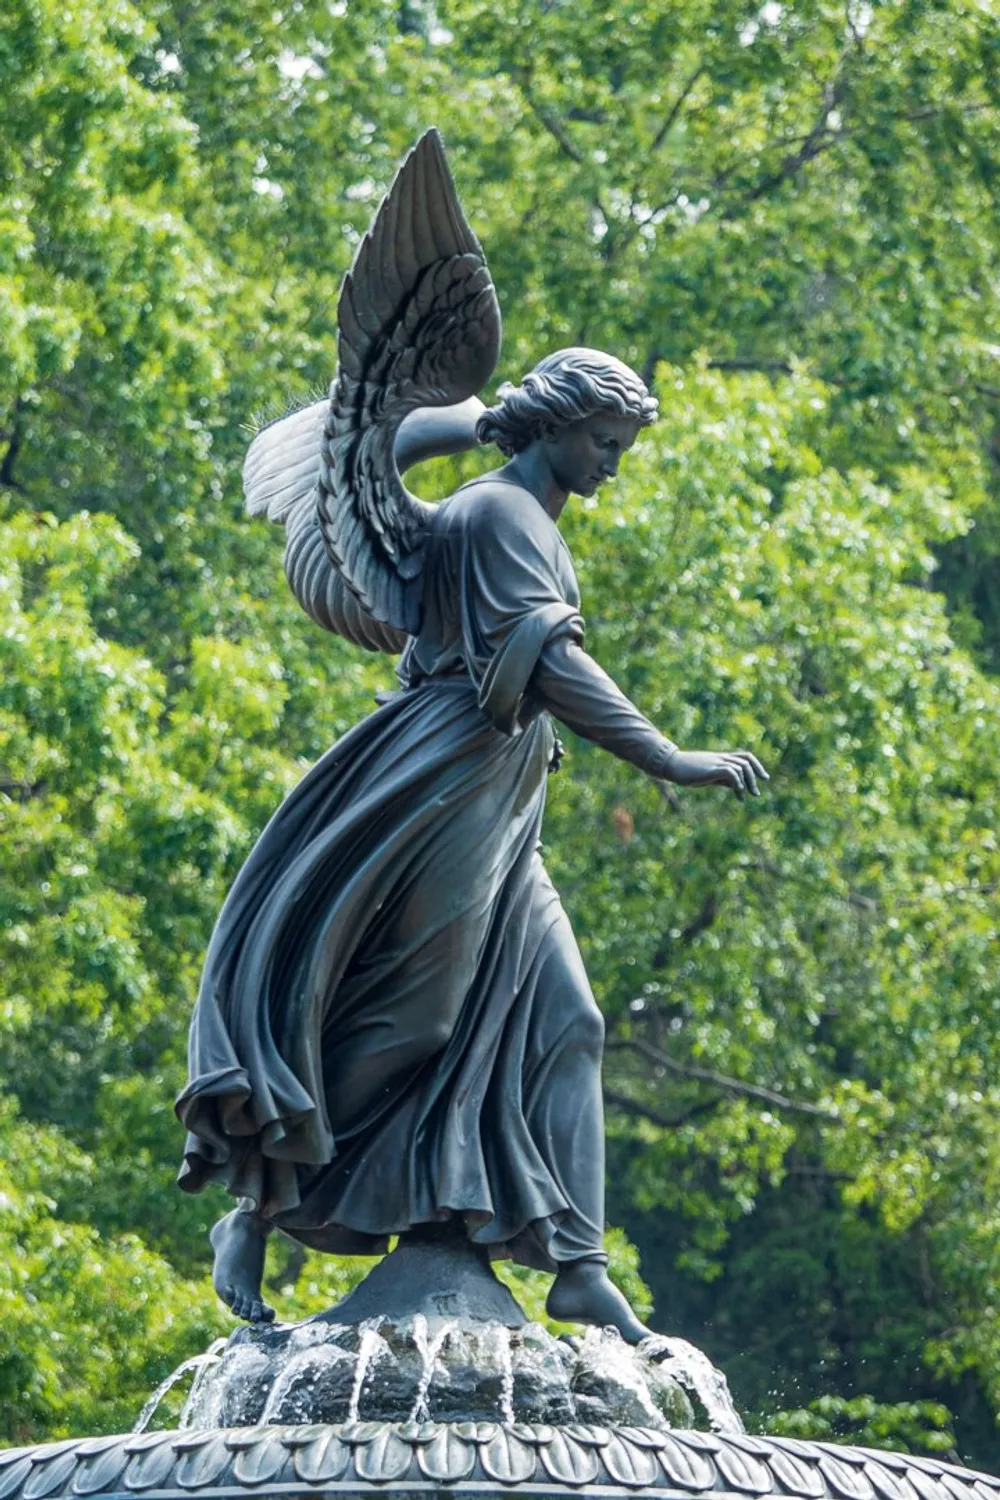 The image shows a bronze statue of an angel with wings standing on top of a fountain against a backdrop of green foliage